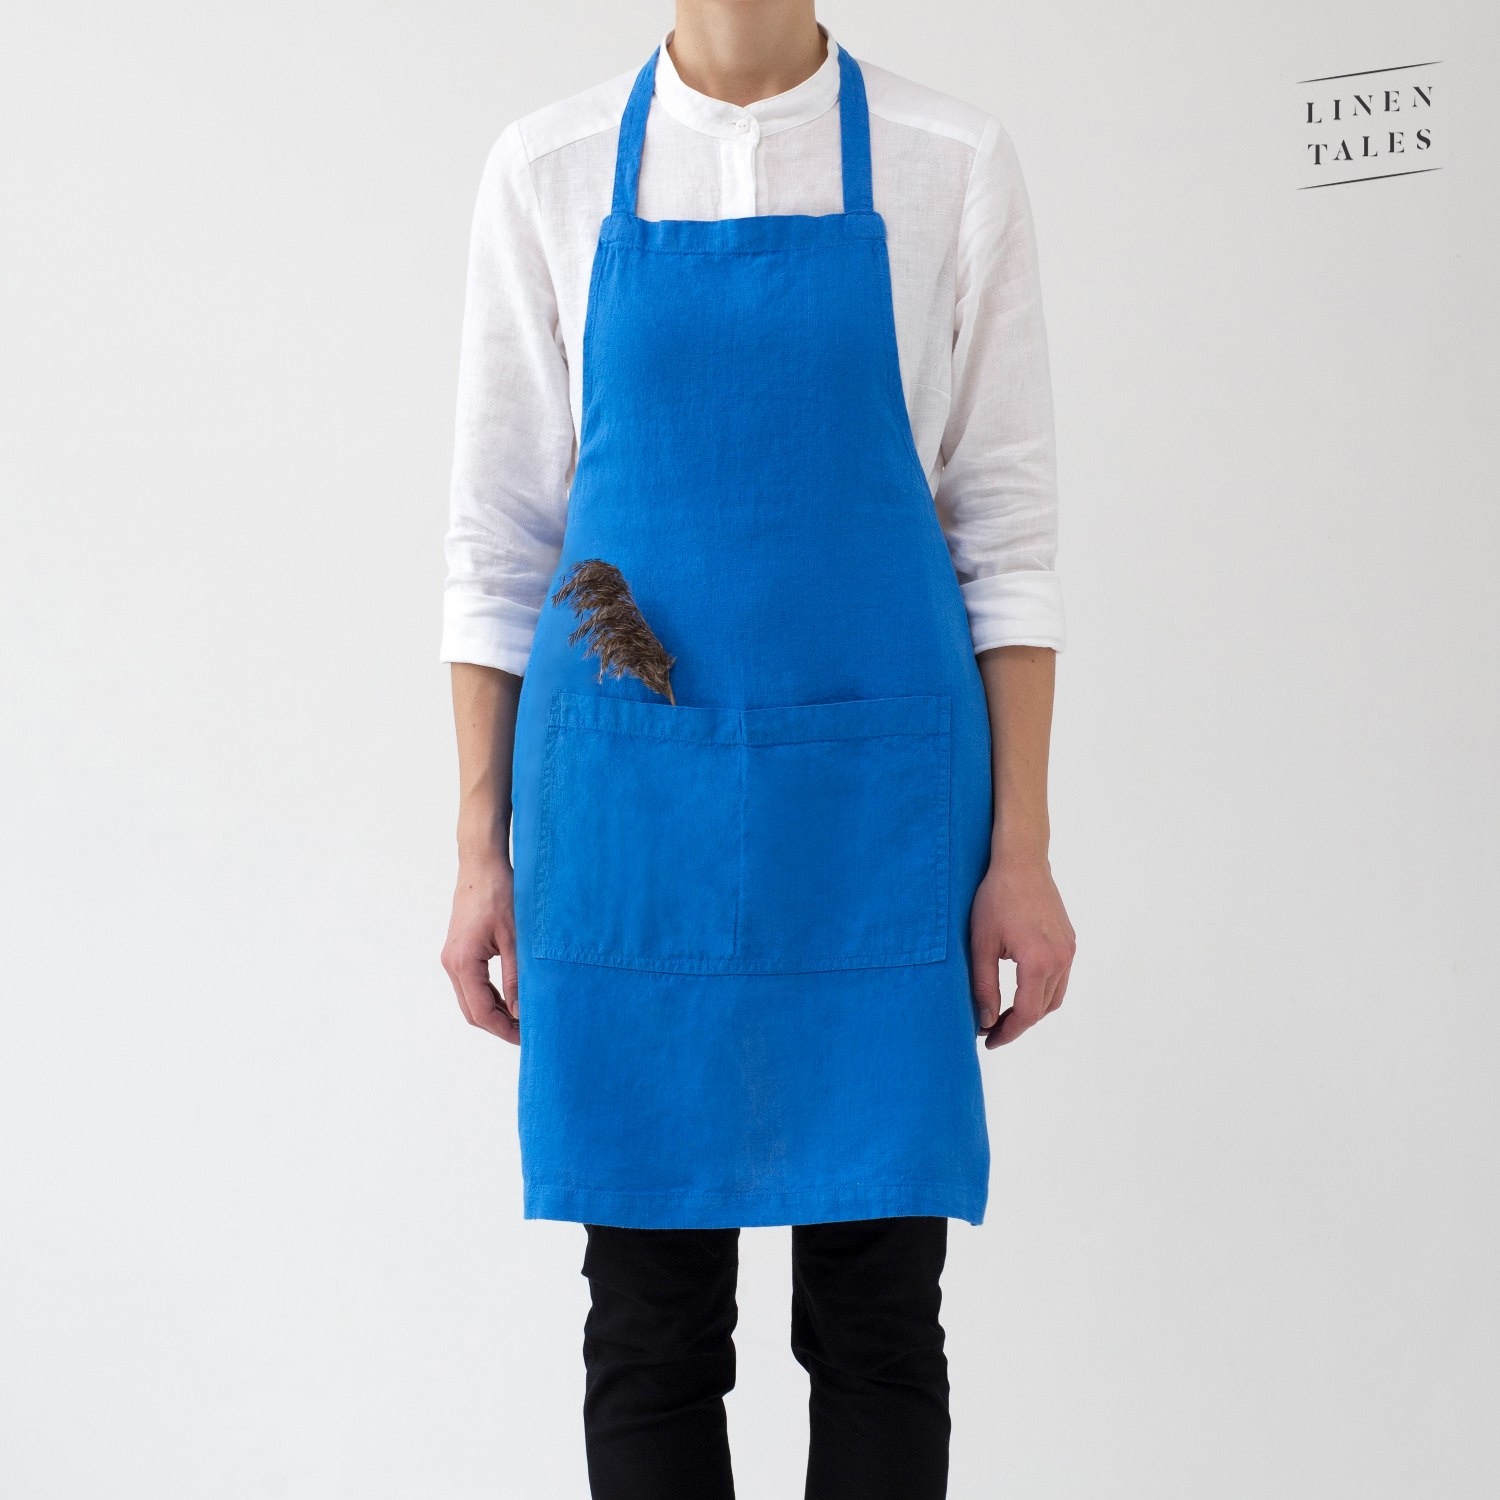 Linen Tales 'French Blue' Daily Apron